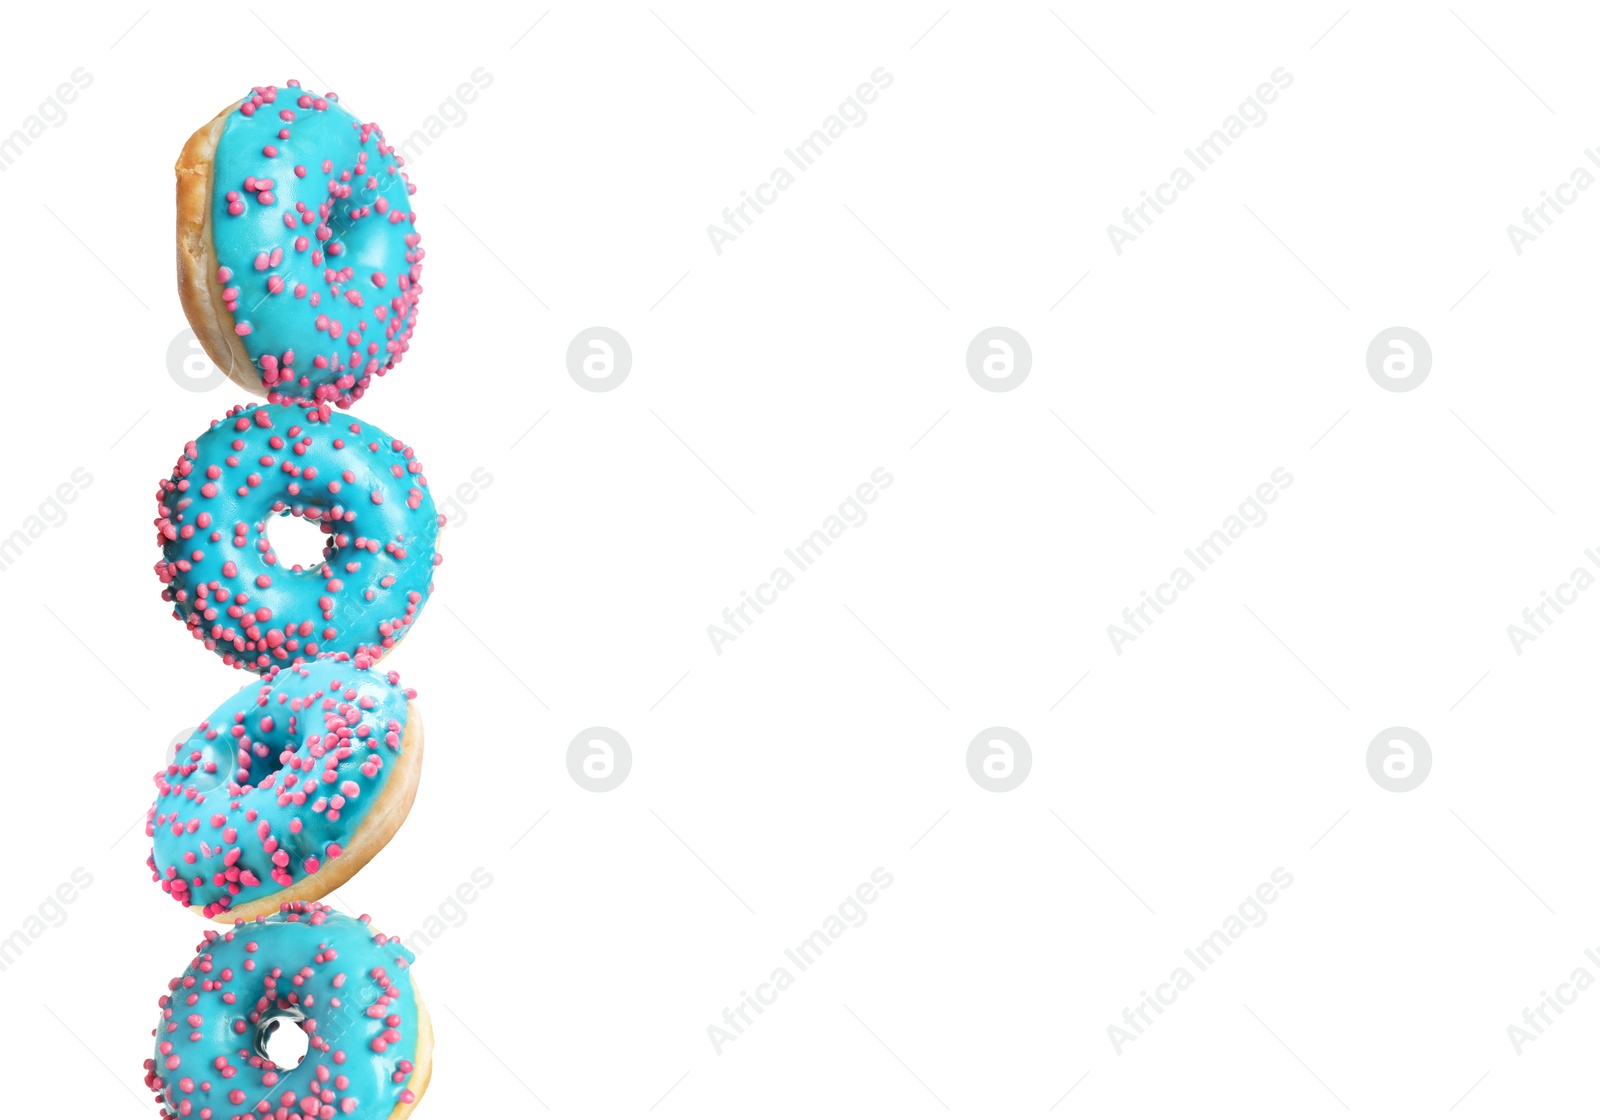 Image of Tasty donuts with sprinkles on white background